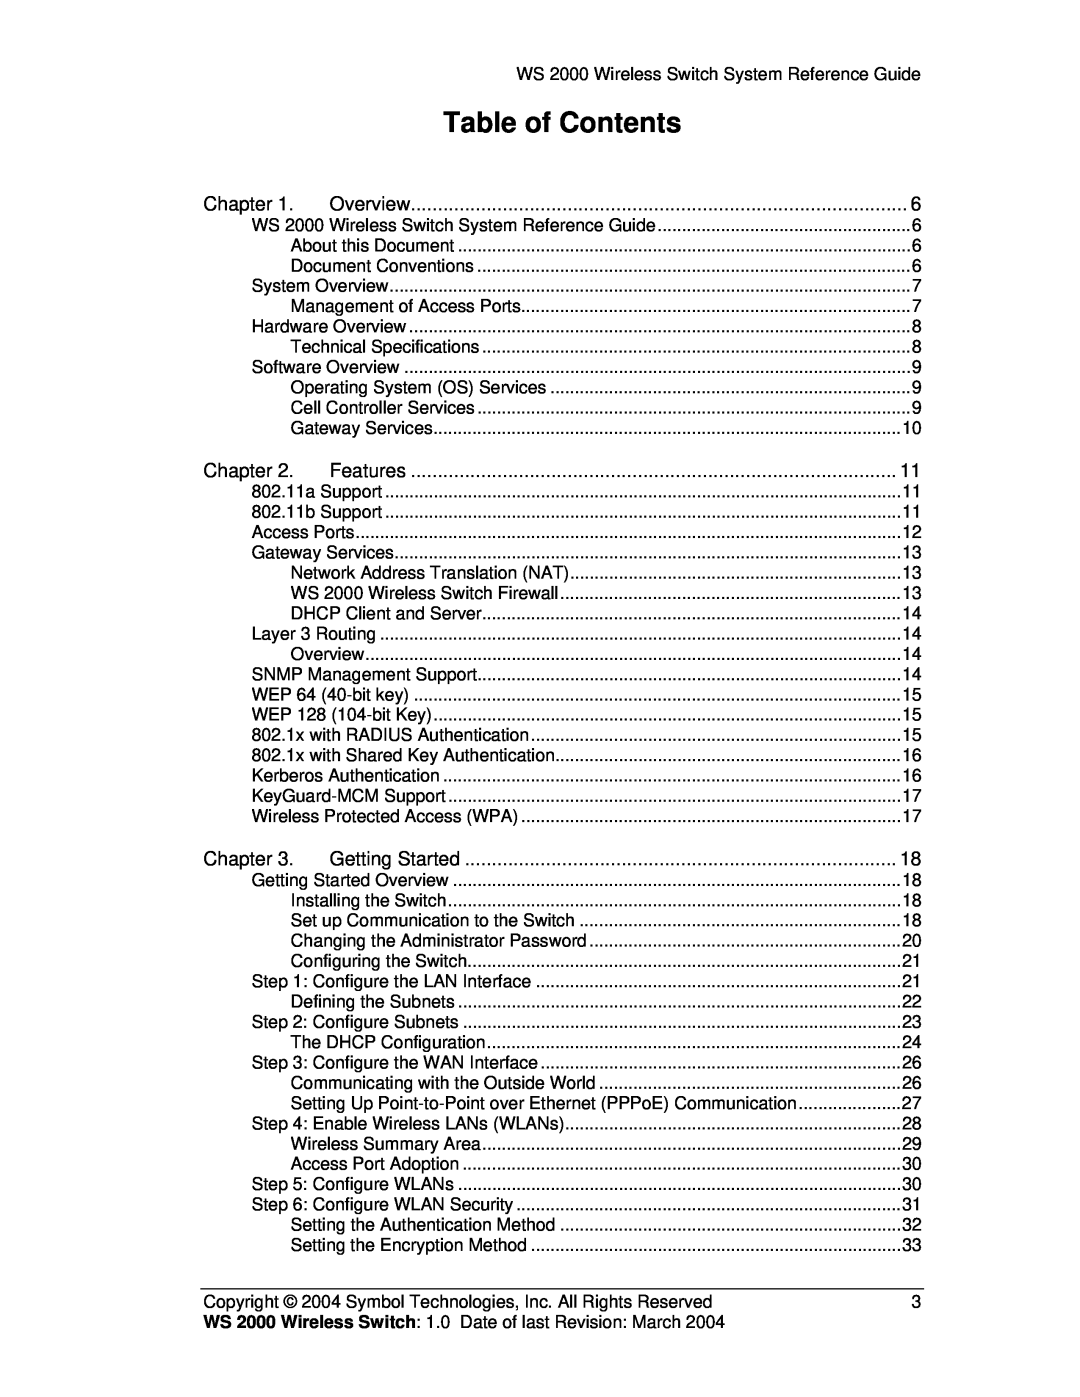 Symbol Technologies WS 2000 manual Table of Contents, Chapter, Overview, Features, Getting Started 